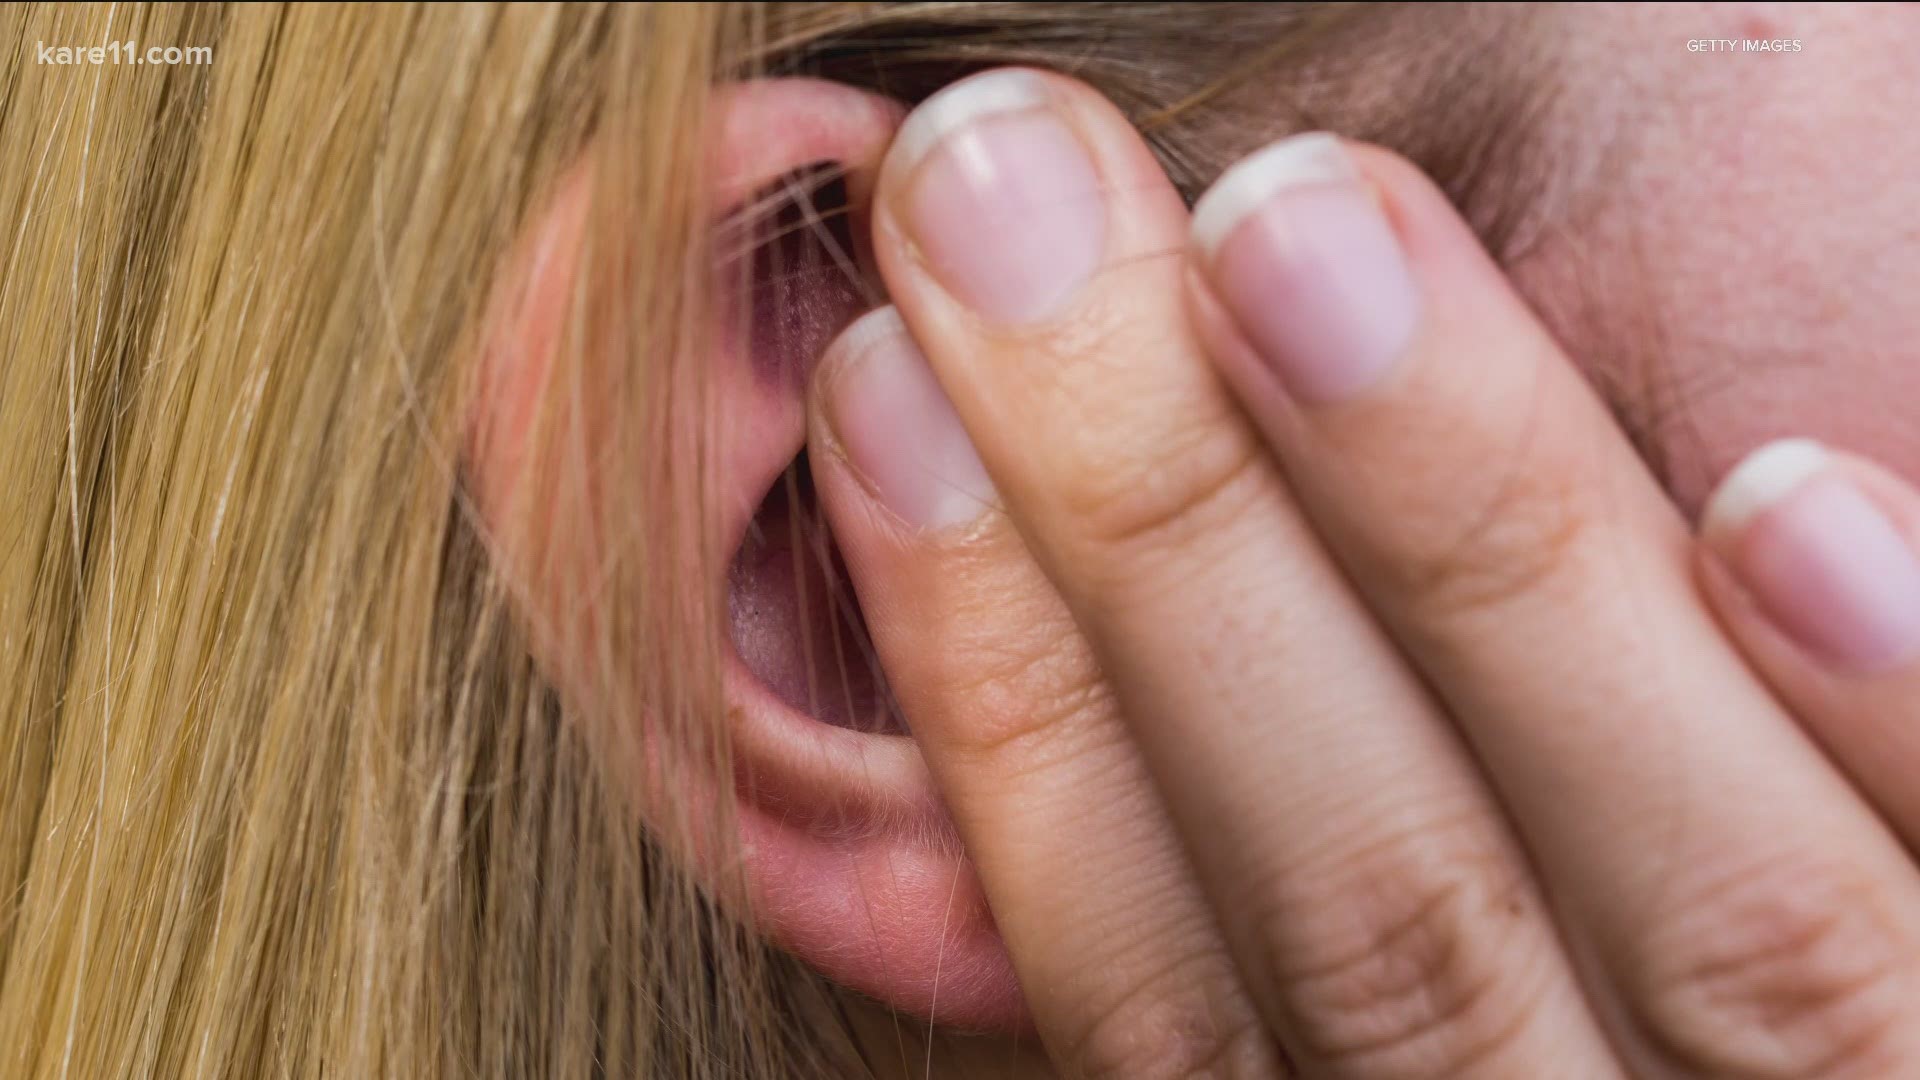 Clinical trial shows promise for tinnitus treatment